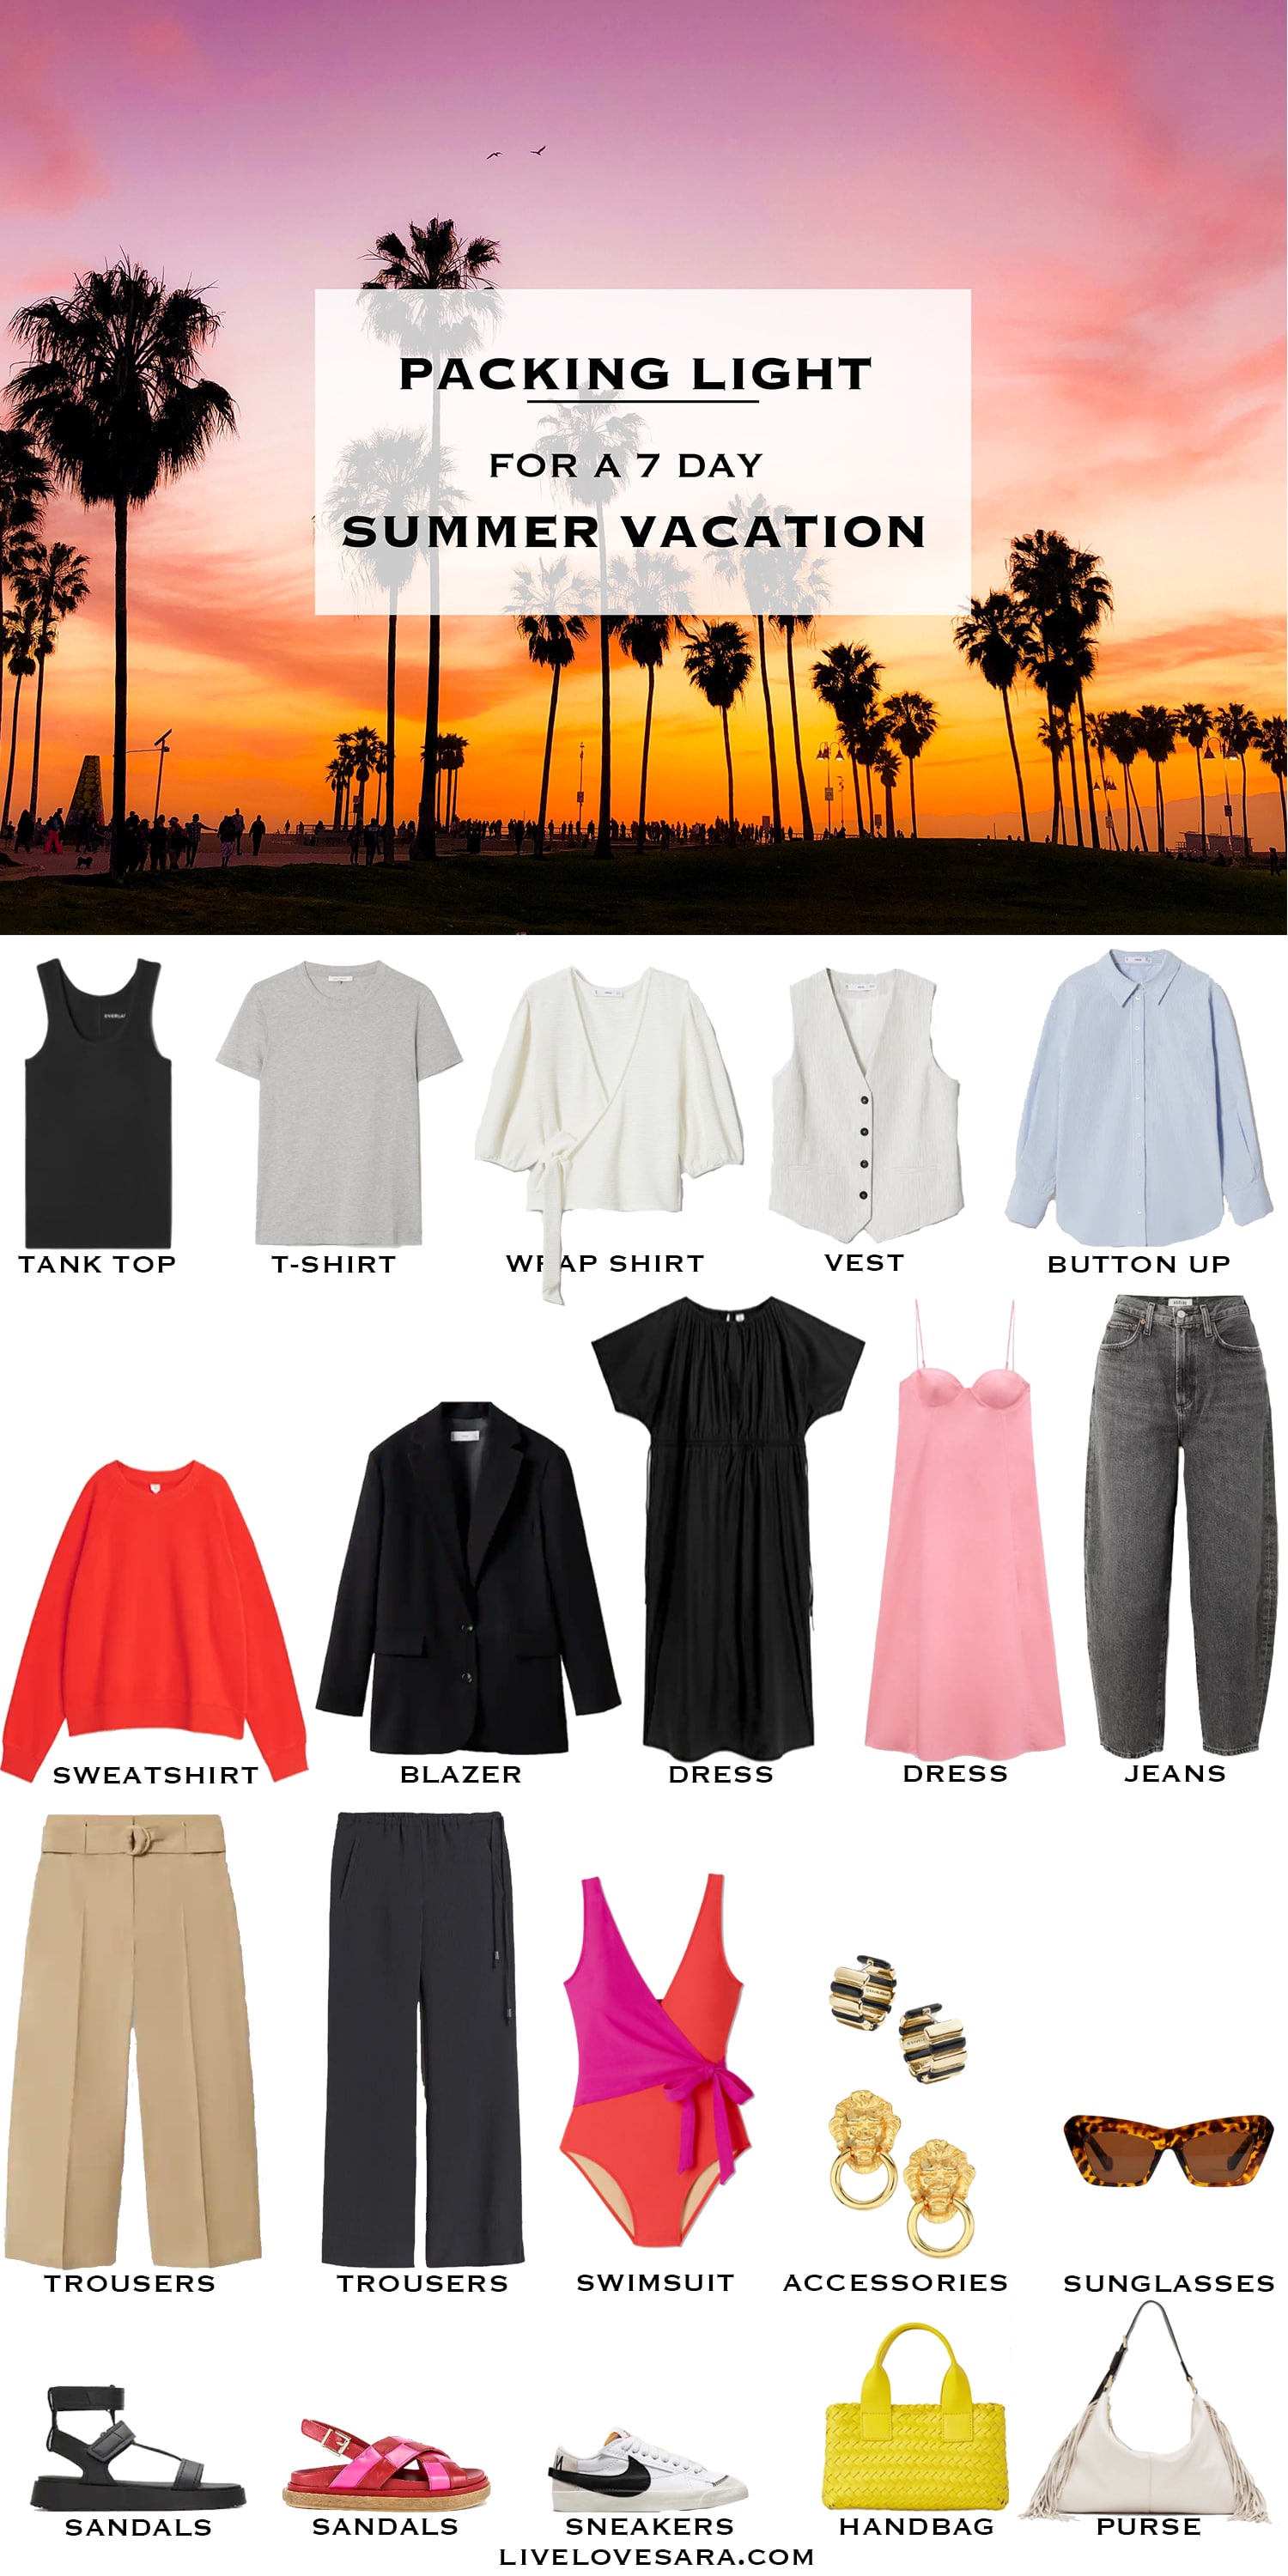 A white background with the image of a sunset and palm trees at the top. Below that is a list of 21 items to pack for a summer vacation.